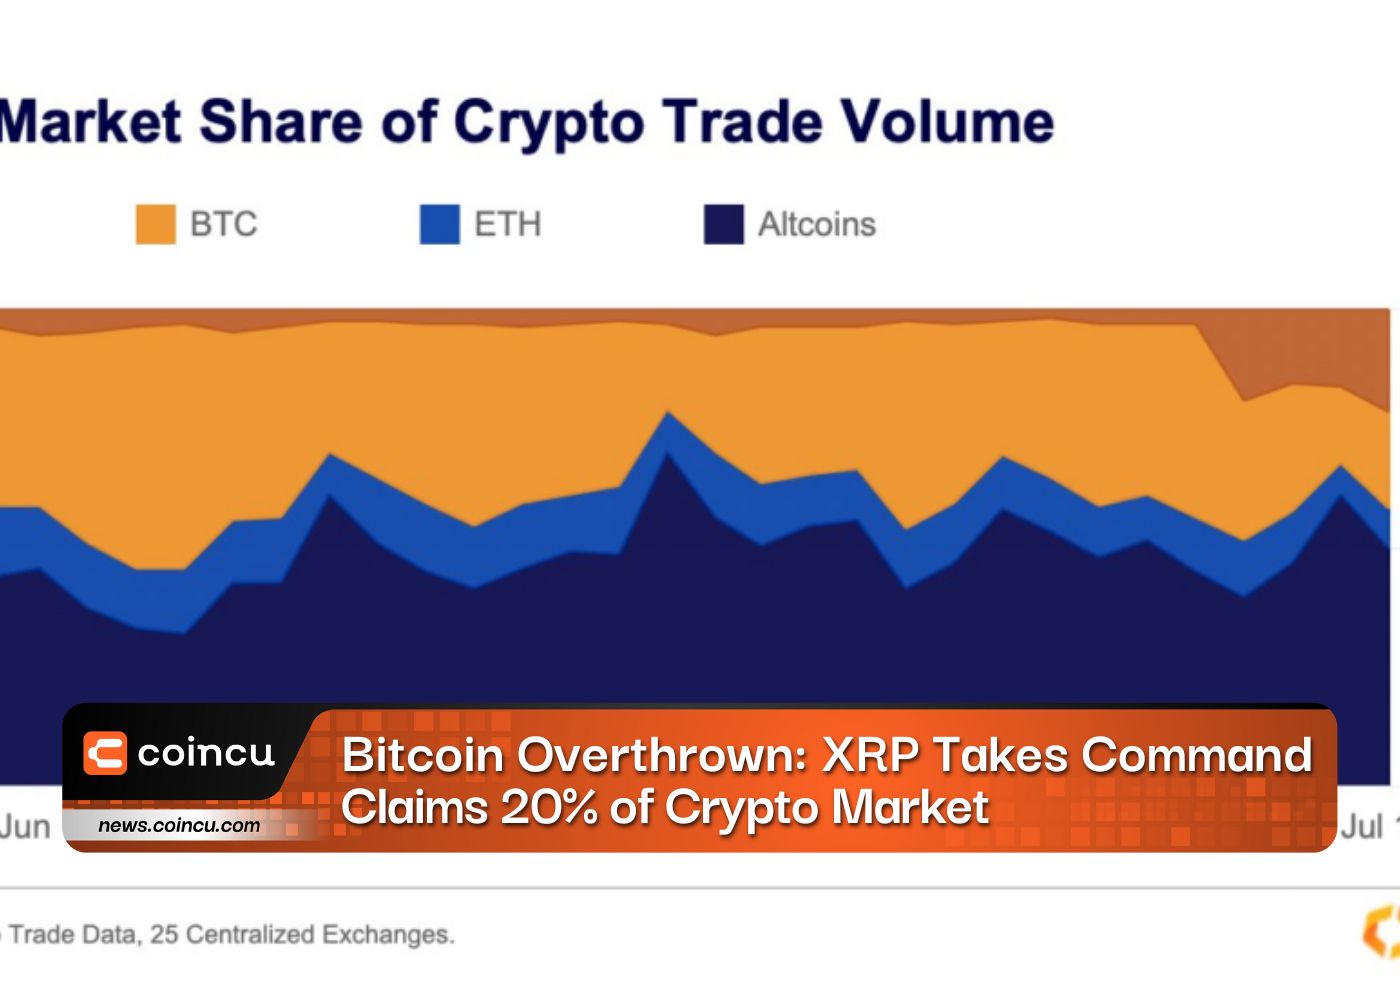 Bitcoin Overthrown: XRP Takes Command, Claims 20% of Crypto Market